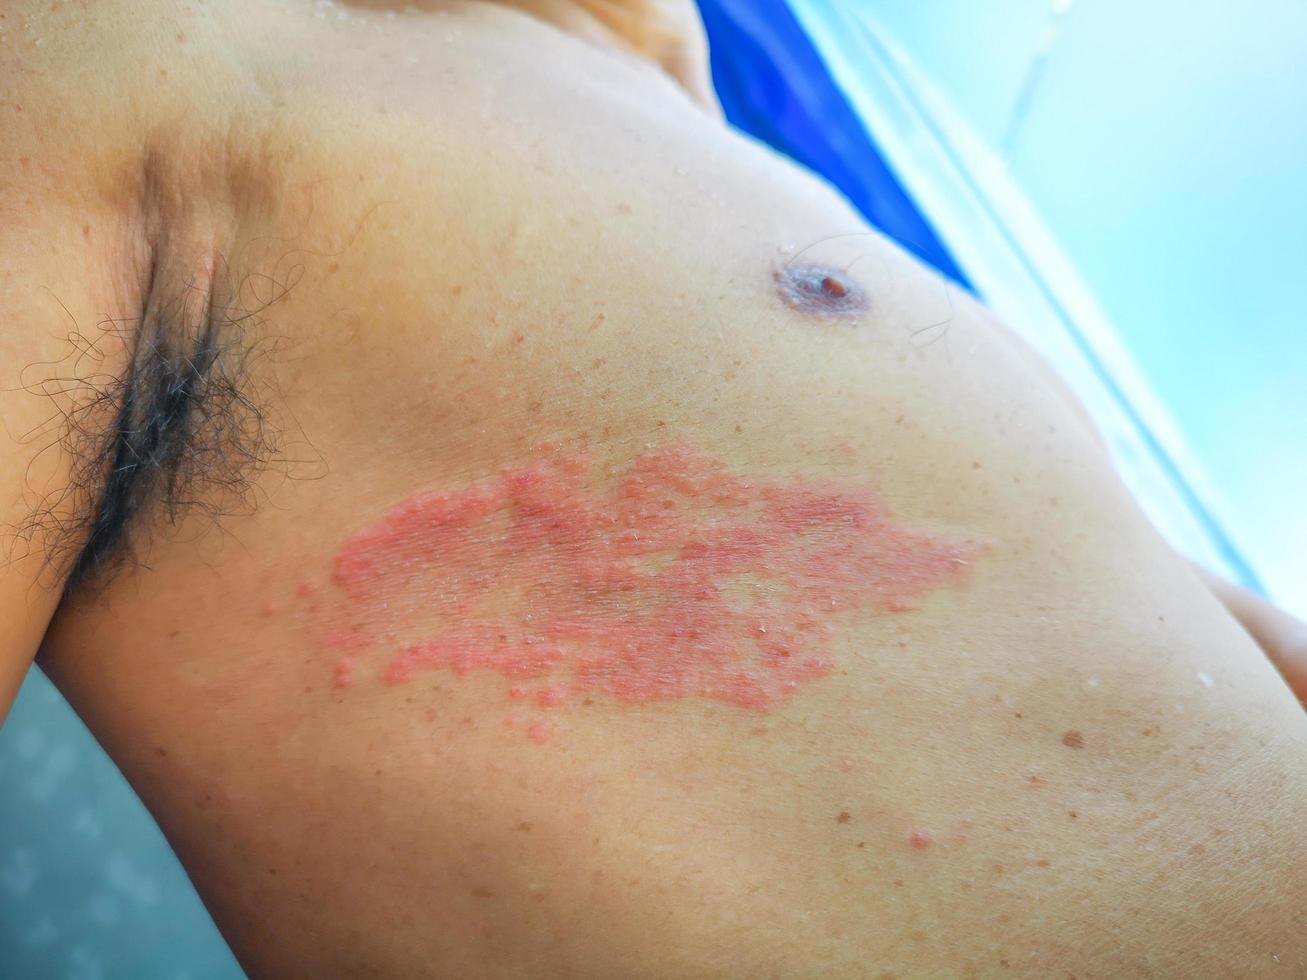 Painful back skin rash with blisters in a limited area.A man who had varicella blister, chickenpox, Herpes zoster, or Shingles. photo